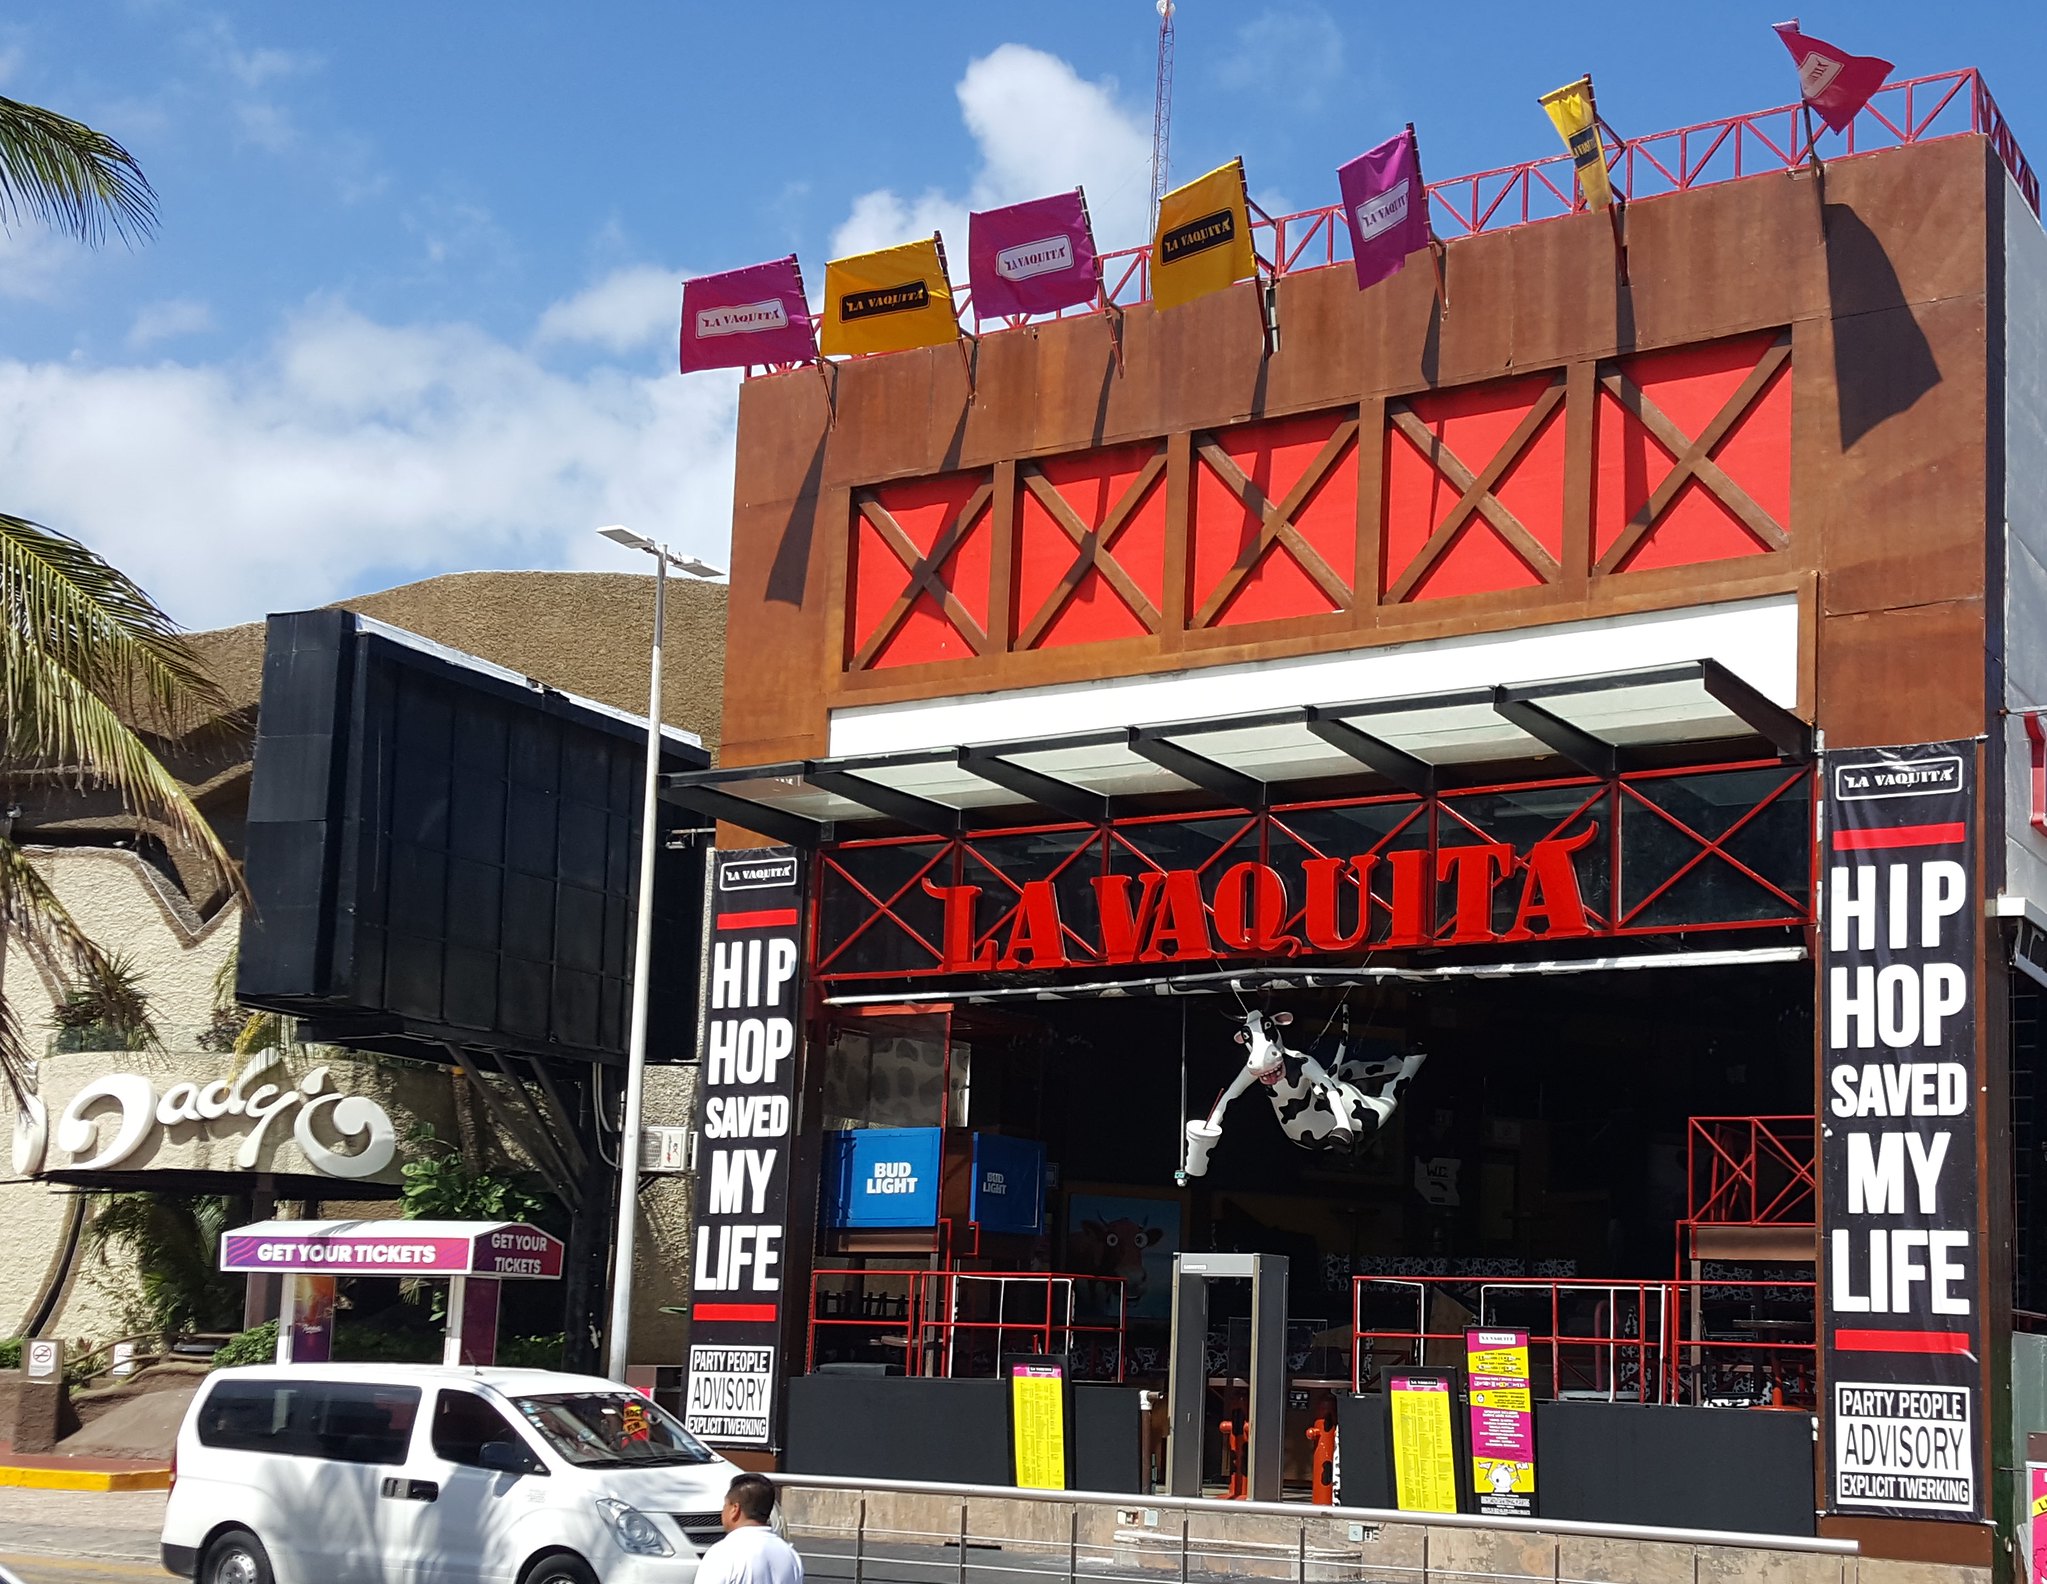 The empty La Vaquita in the morning with its distinct red sign and life-size cow figure hanging by the ceiling, one of the best clubs in Cancun